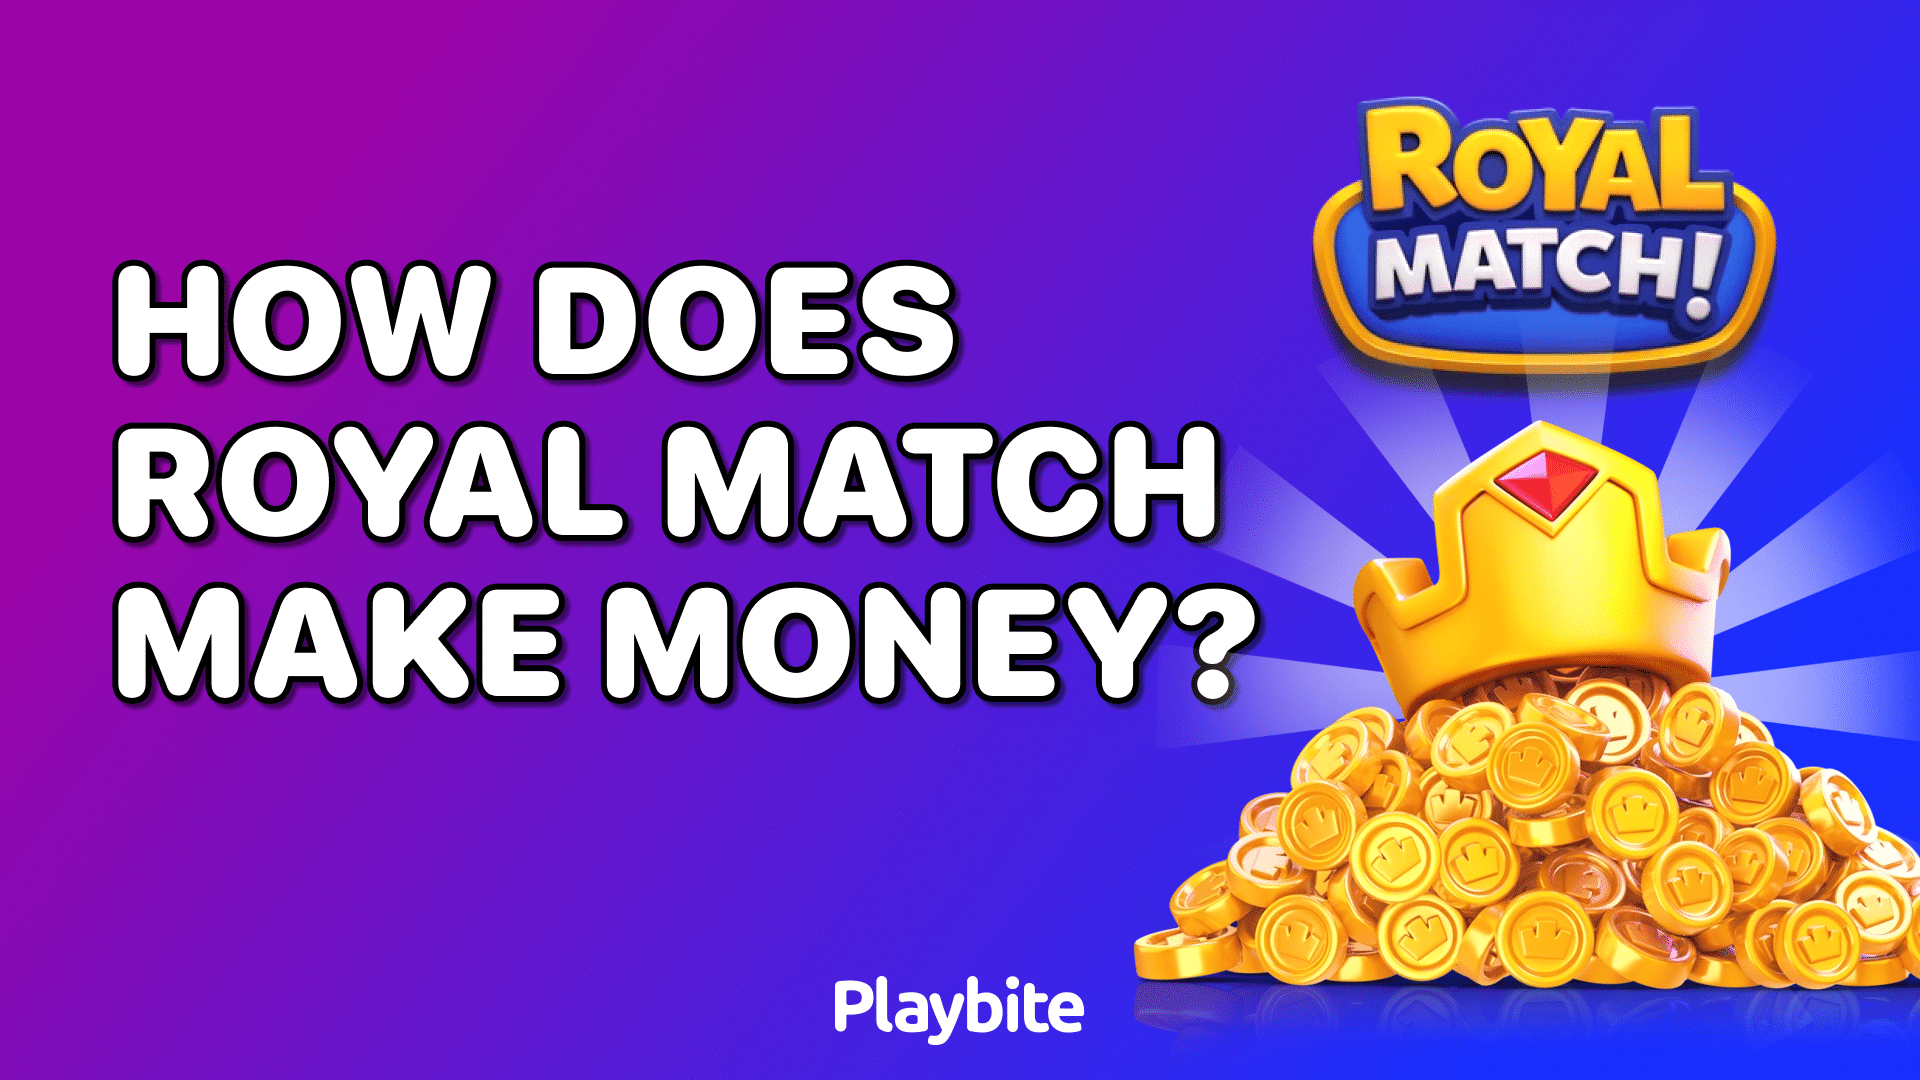 How Does Royal Match Make Money?